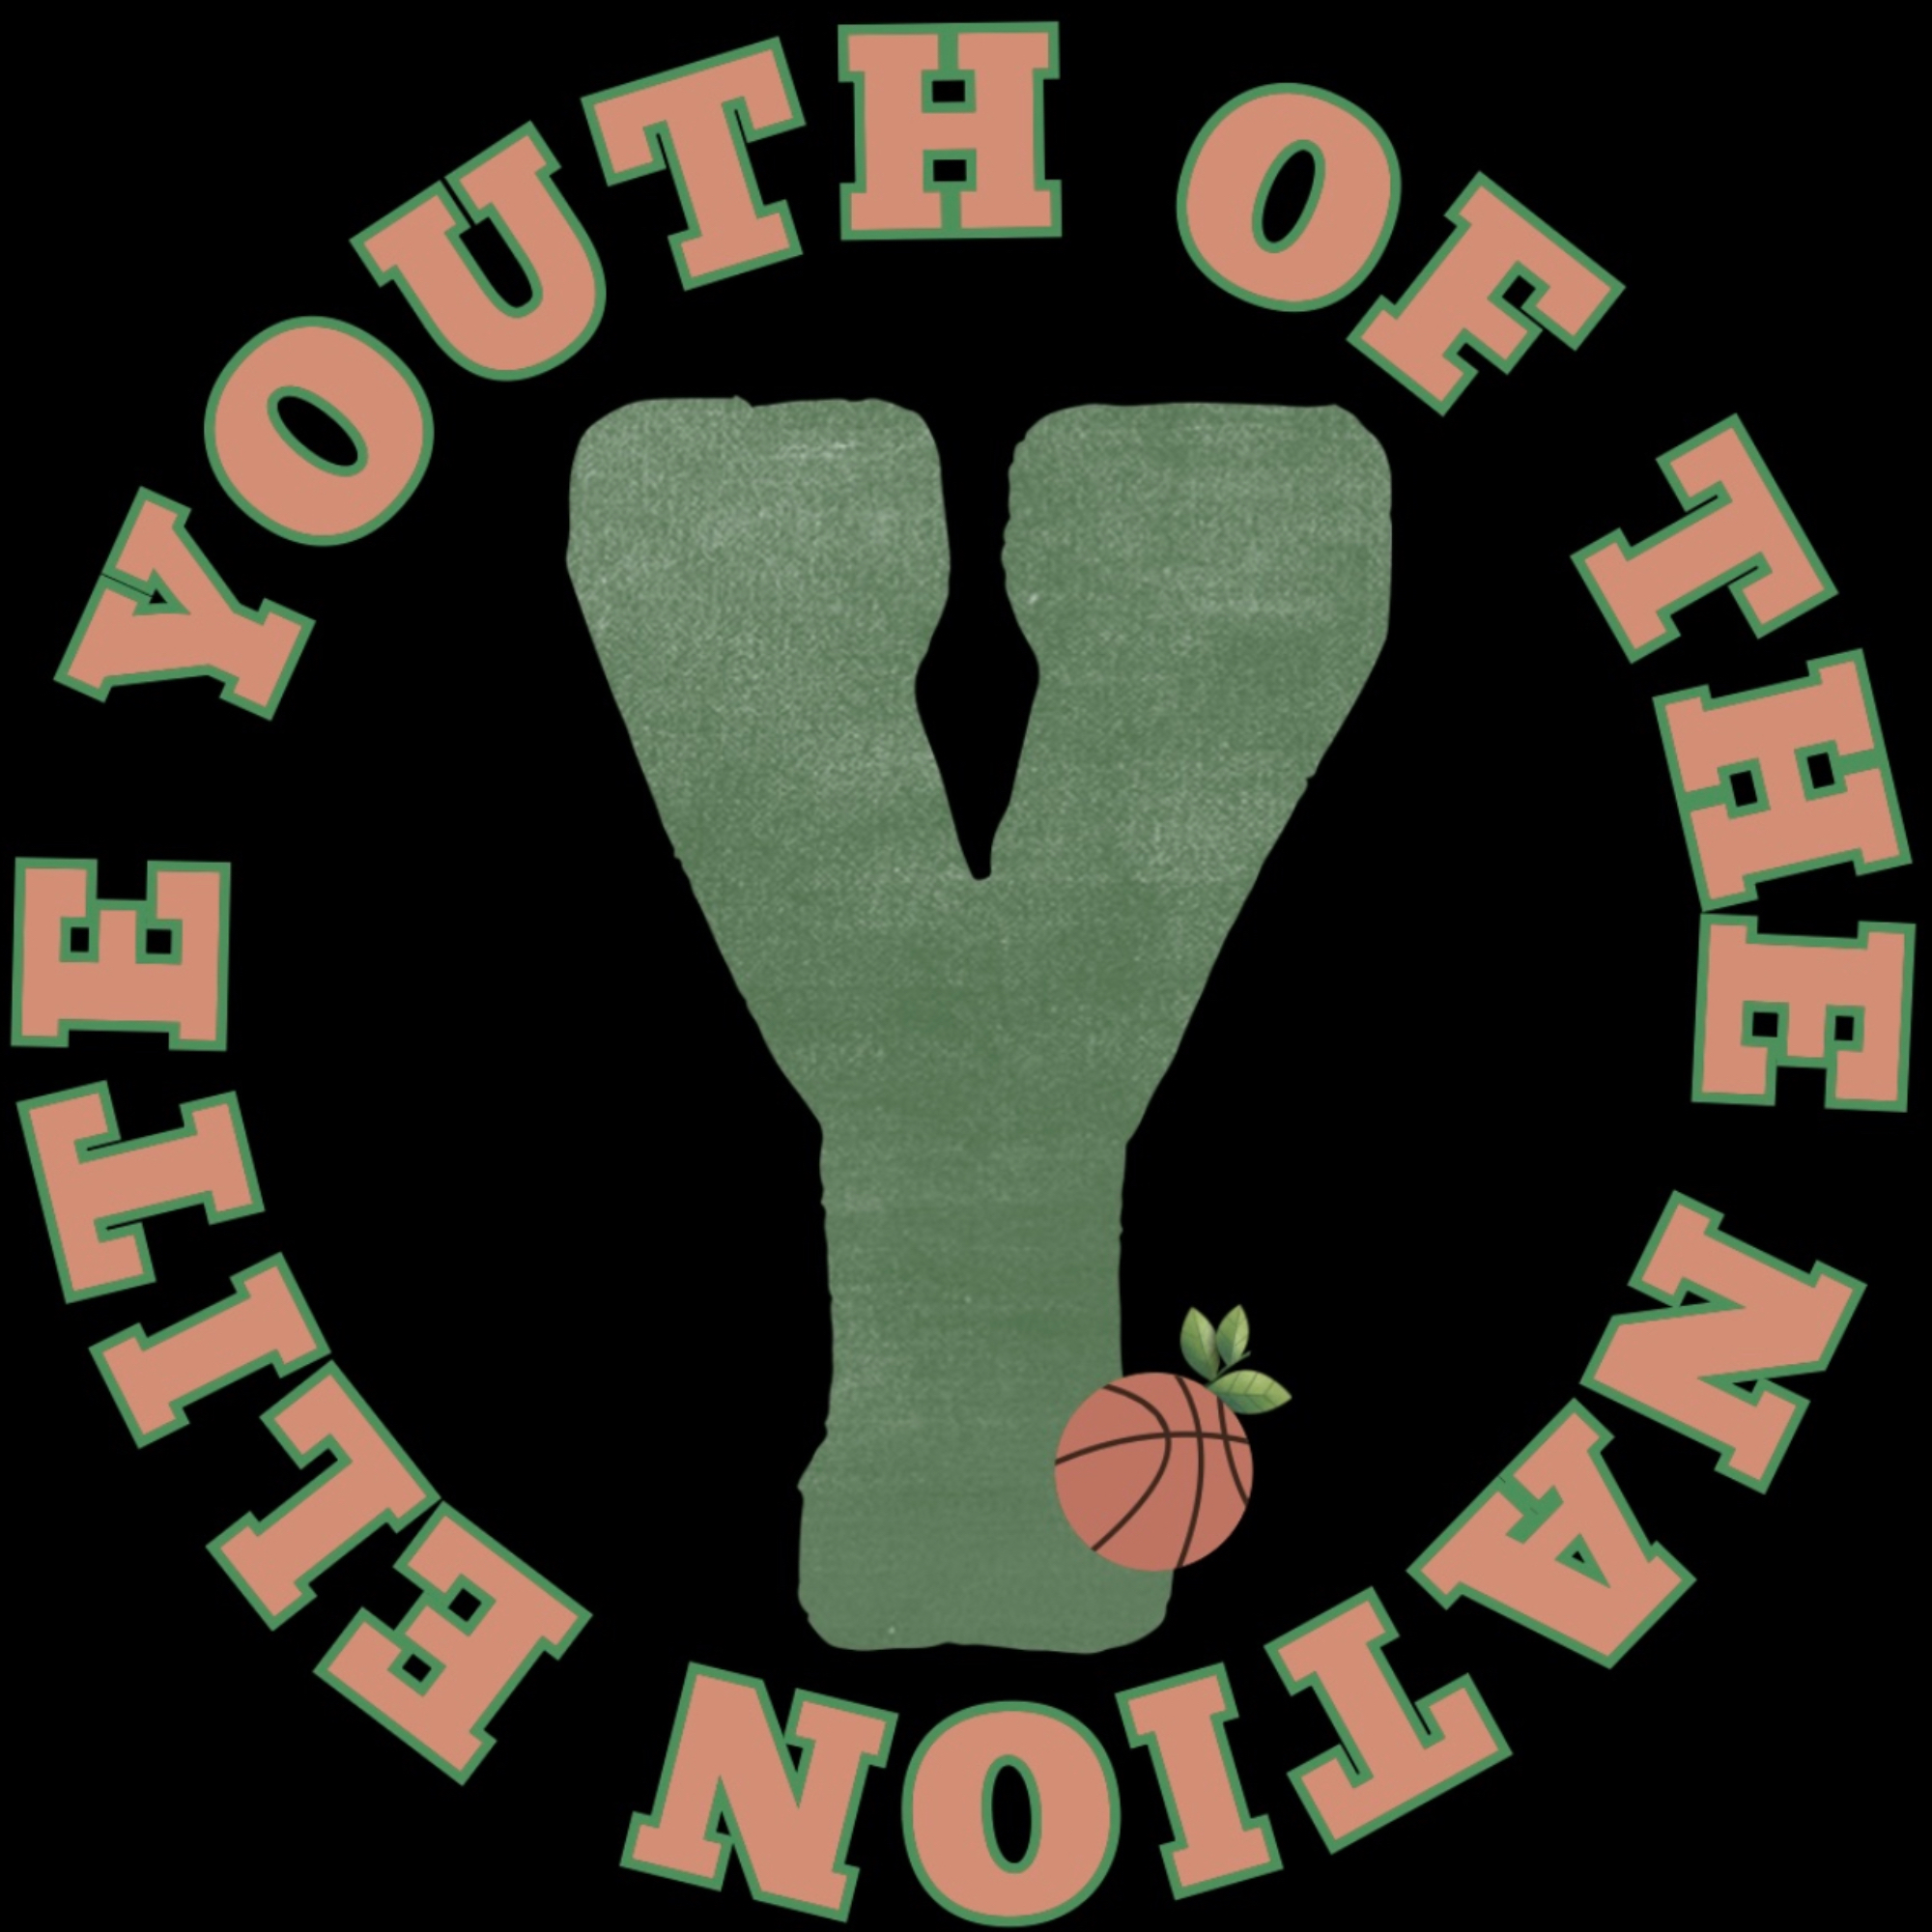 Organization logo for Youth Of The Nation Elite